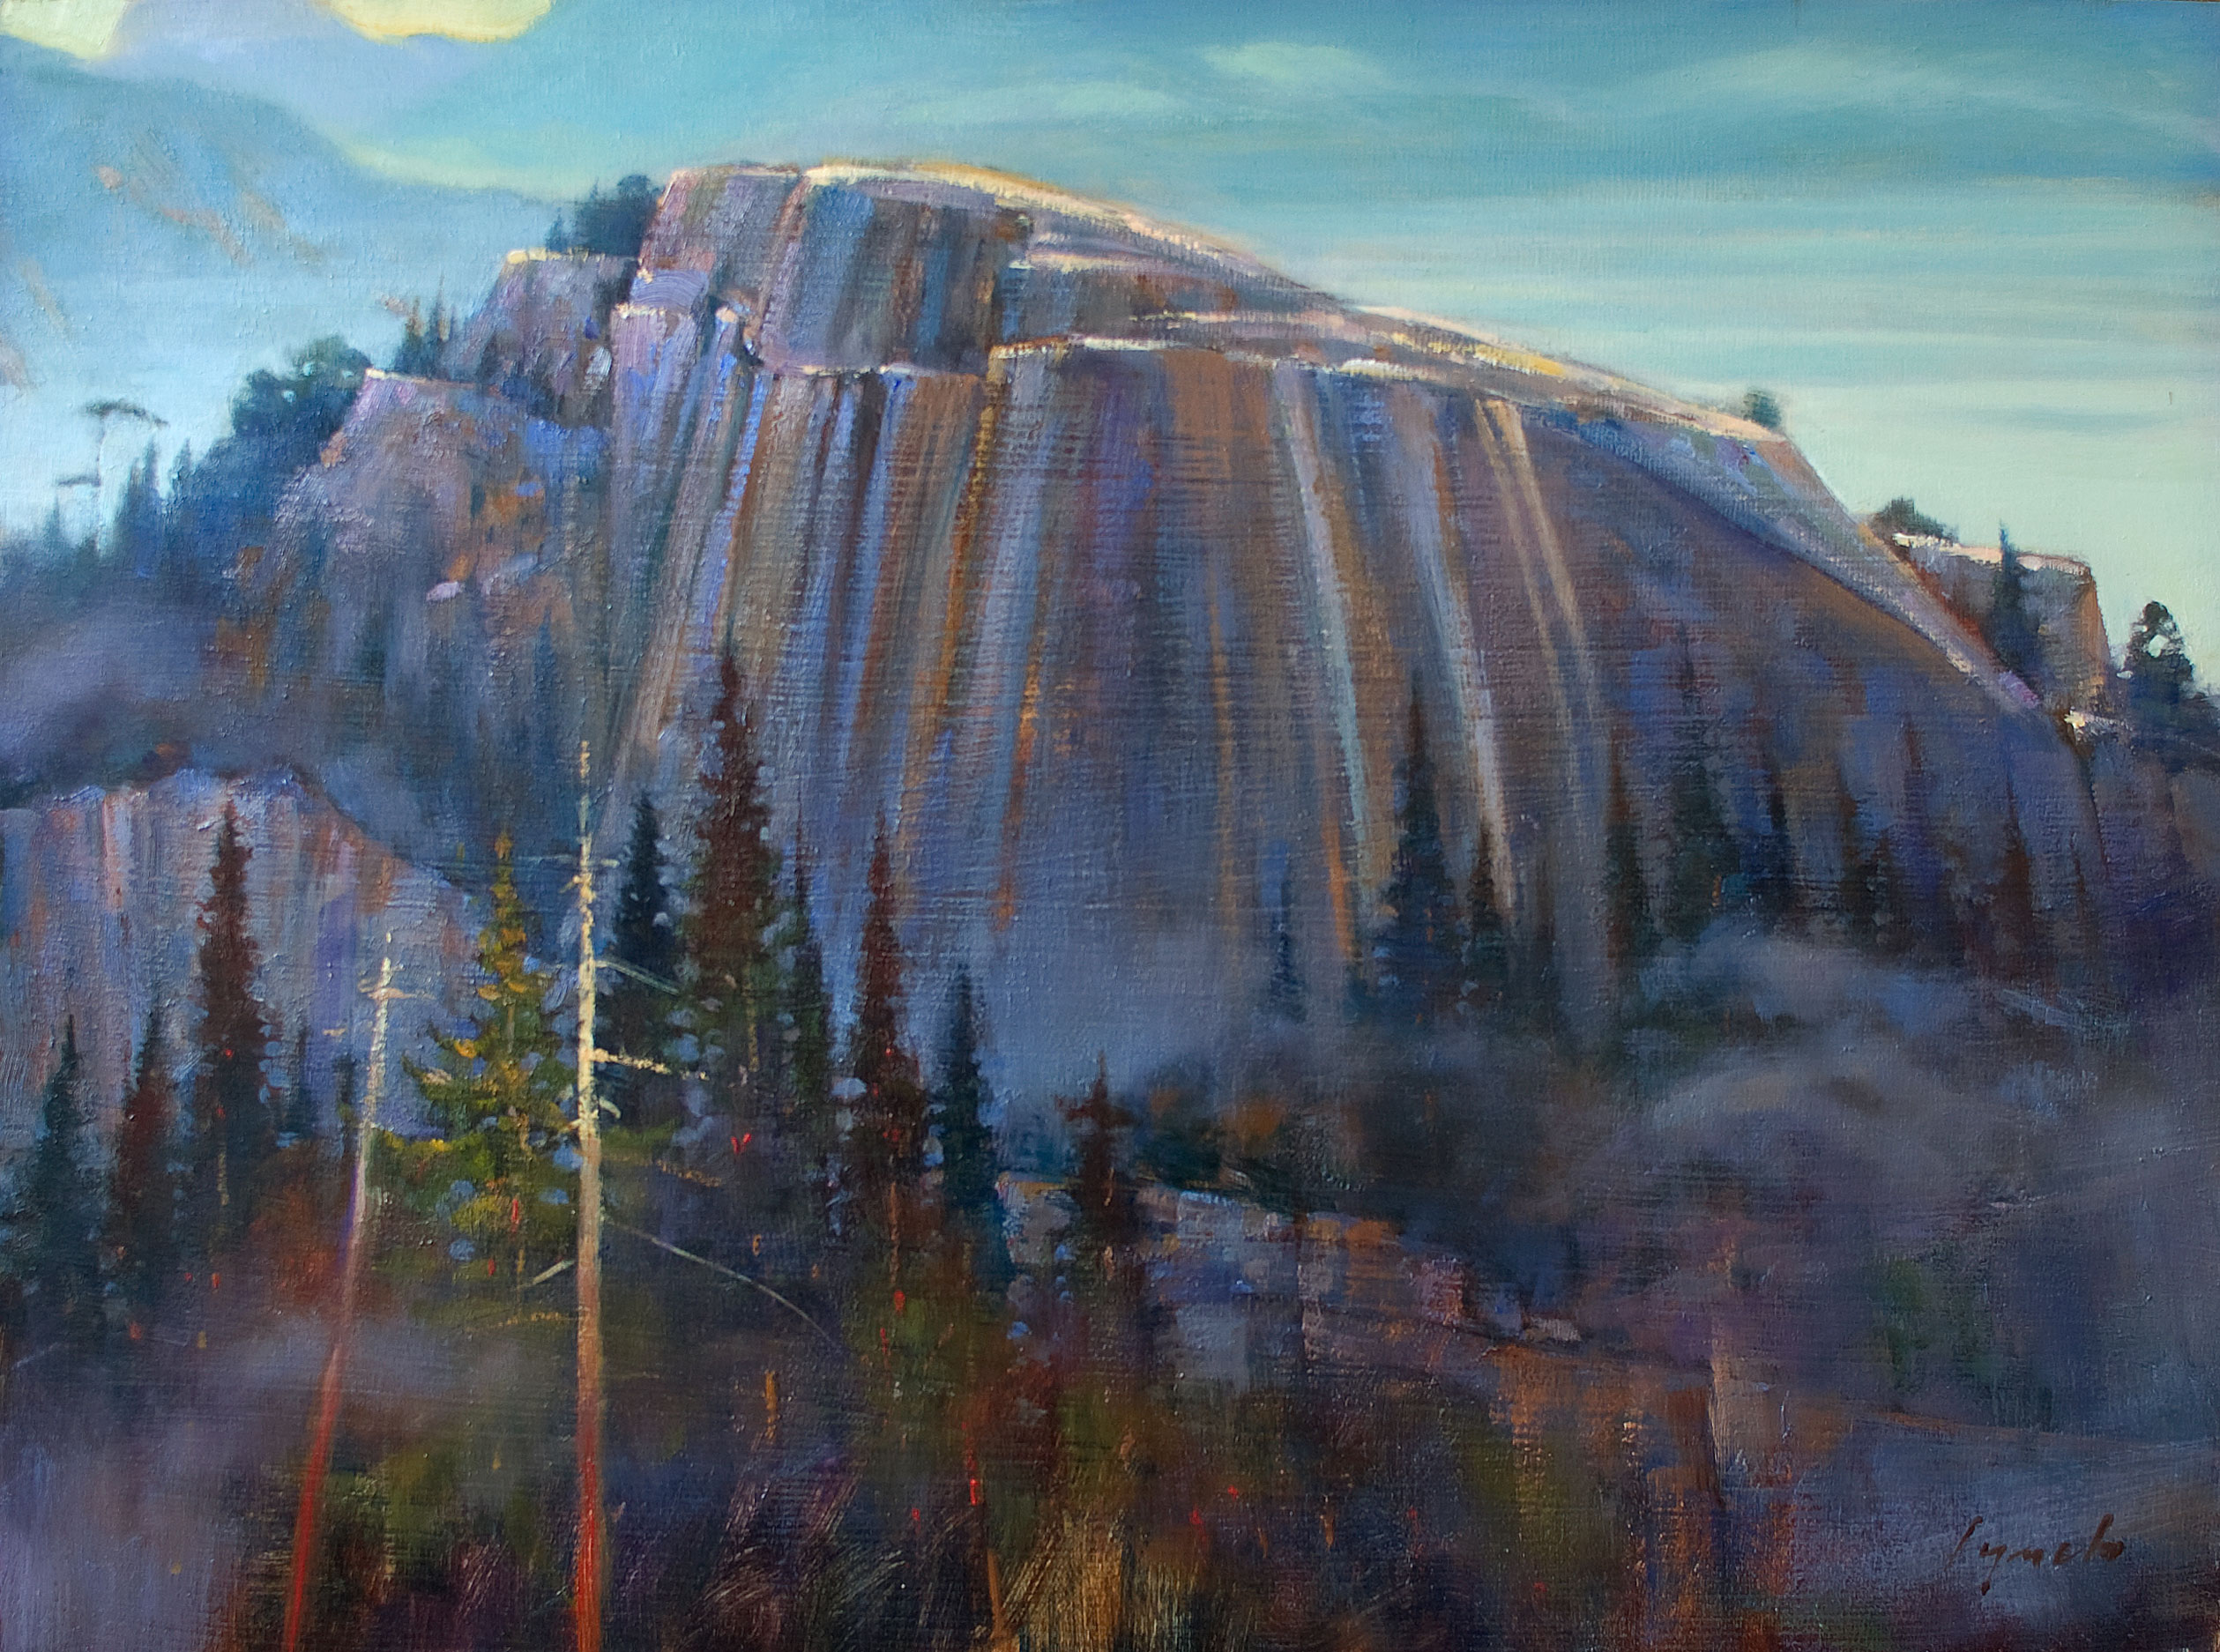 'Chieftain' Squamish. 28 X 24 oil on canvas